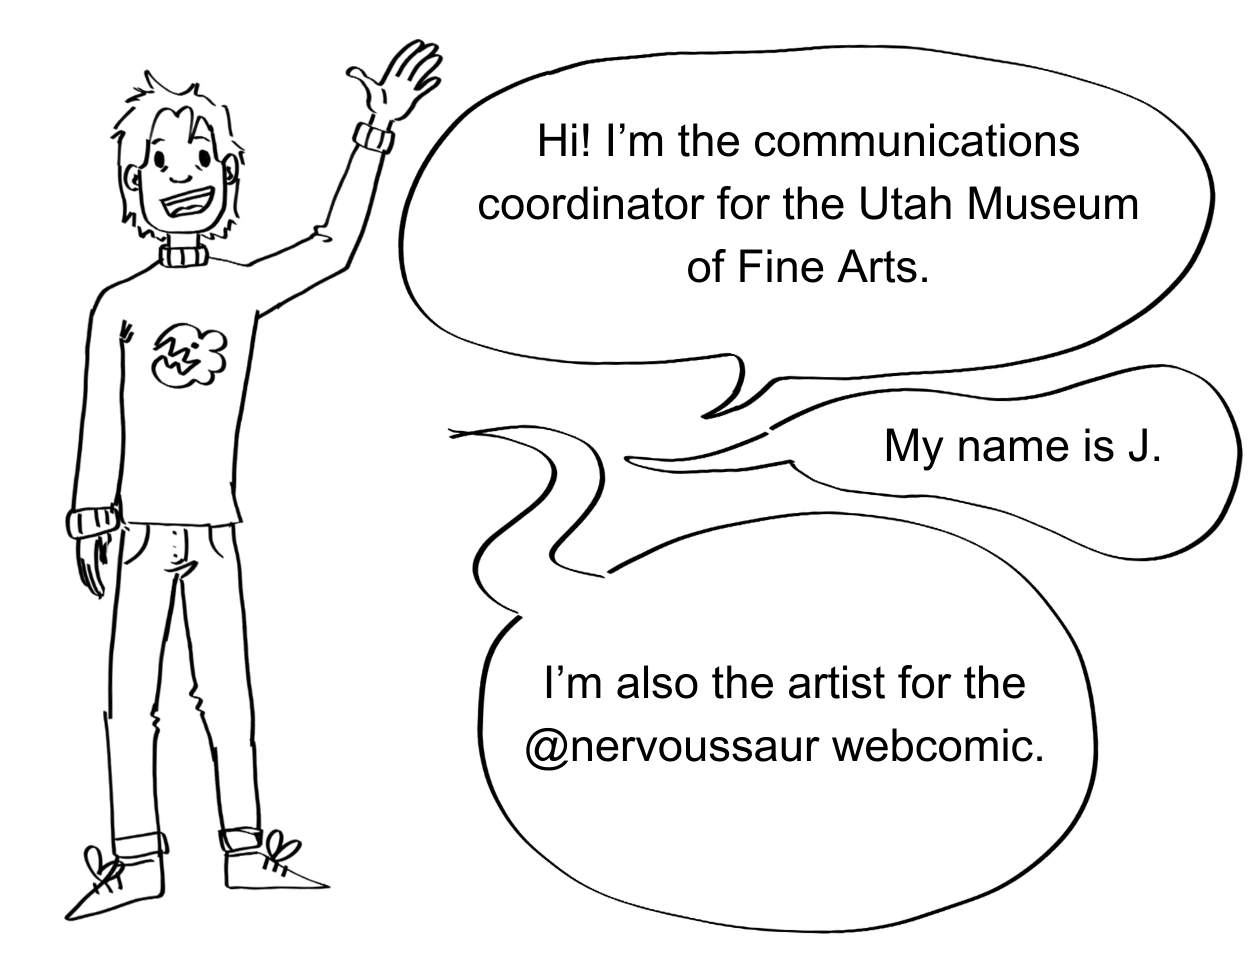 A drawing of a person waves. Three speech bubbles of to the right side say "Hi! I'm the communications coordinator for the Utah Museum of Fine Arts." "My name is J." "I'm also the artist for the @nervoussaur webcomic."